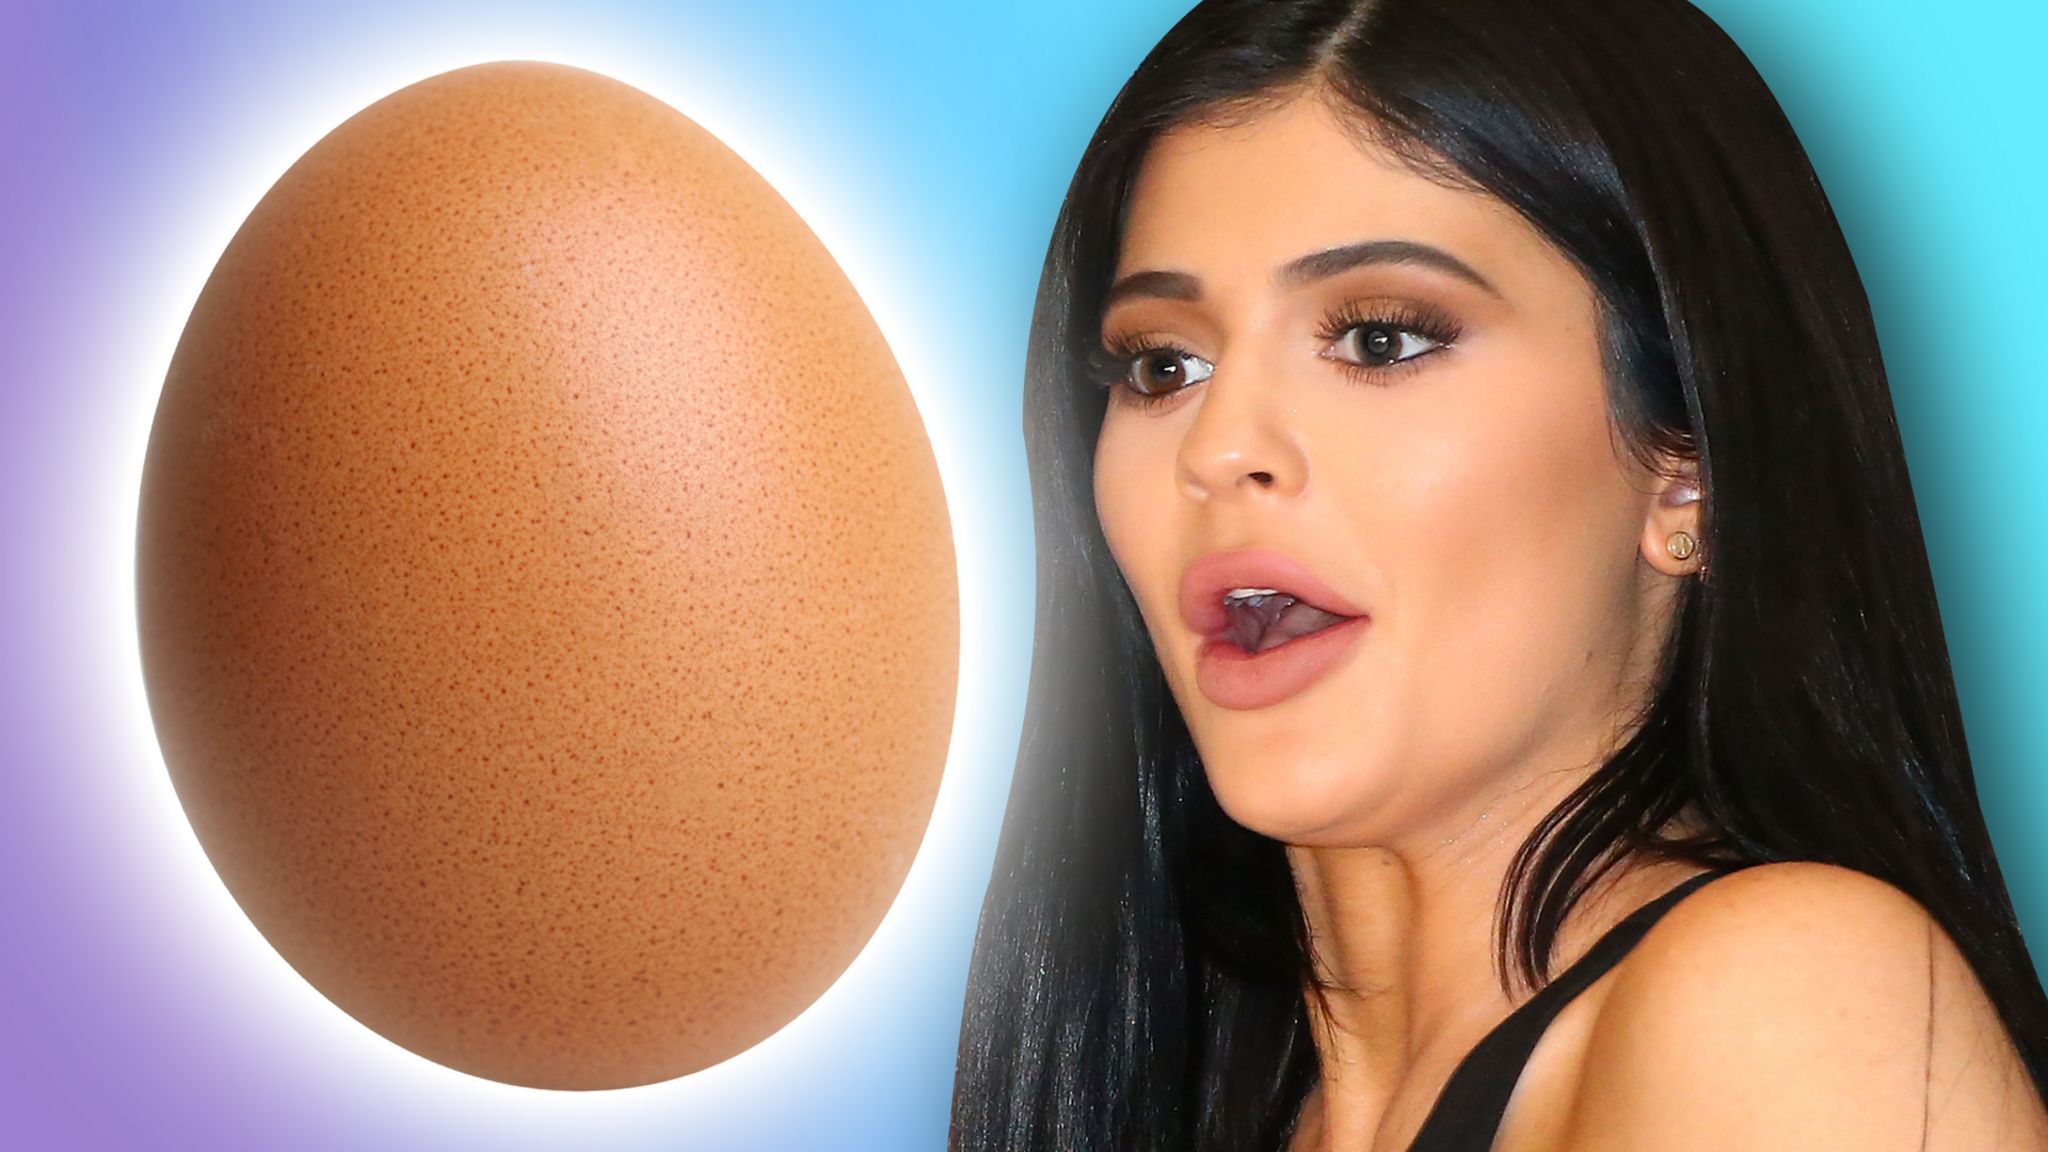 Egg and Kylie Jenner